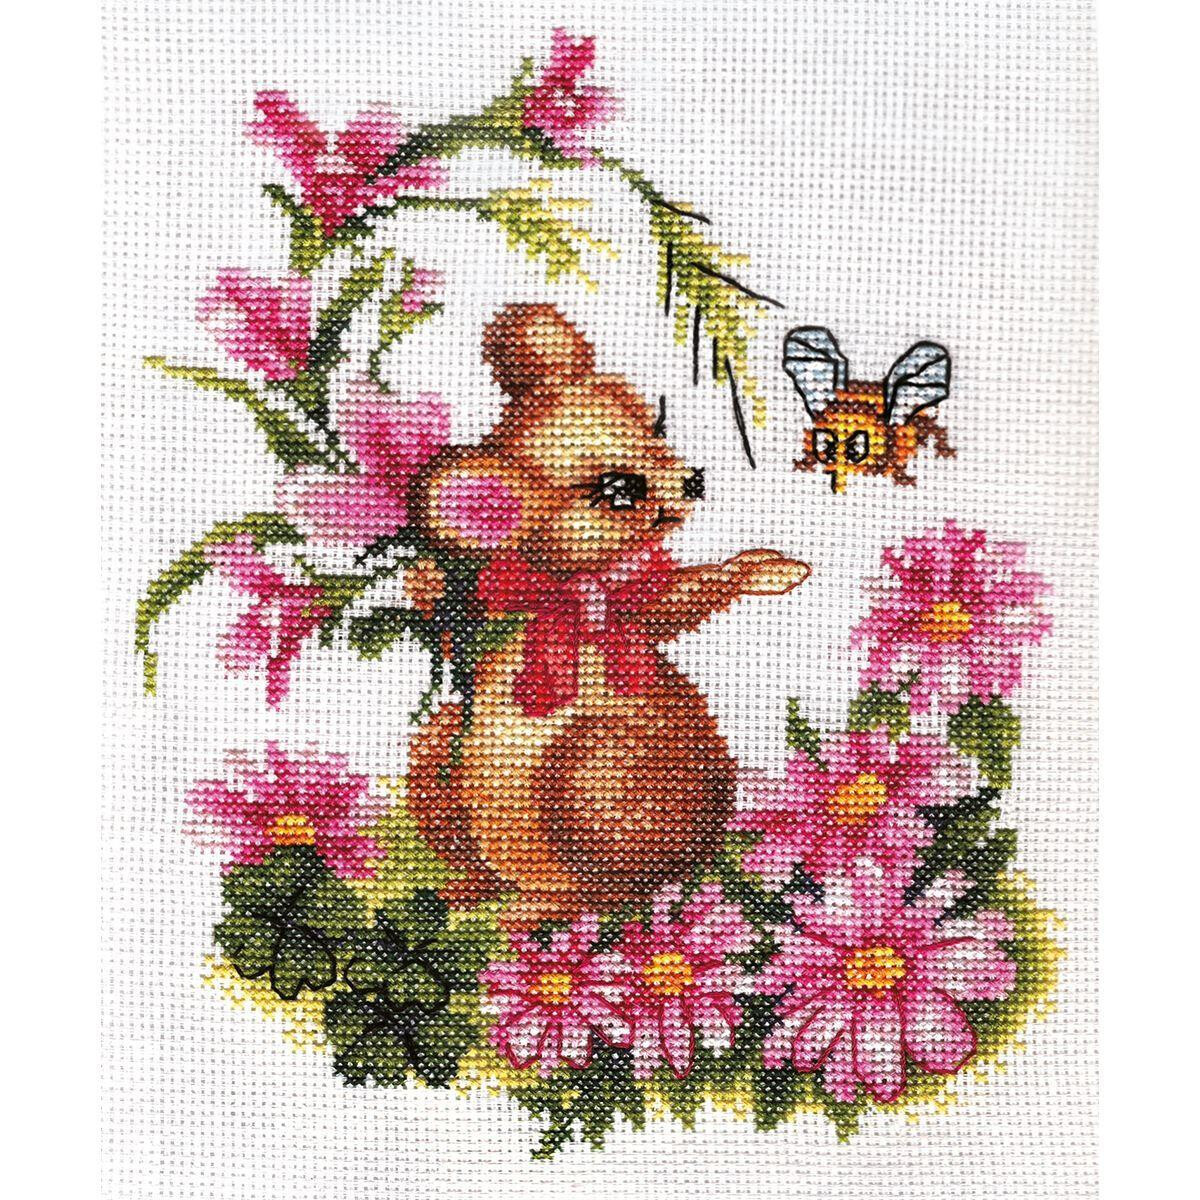 Panna counted cross stitch kit "Mouse with...